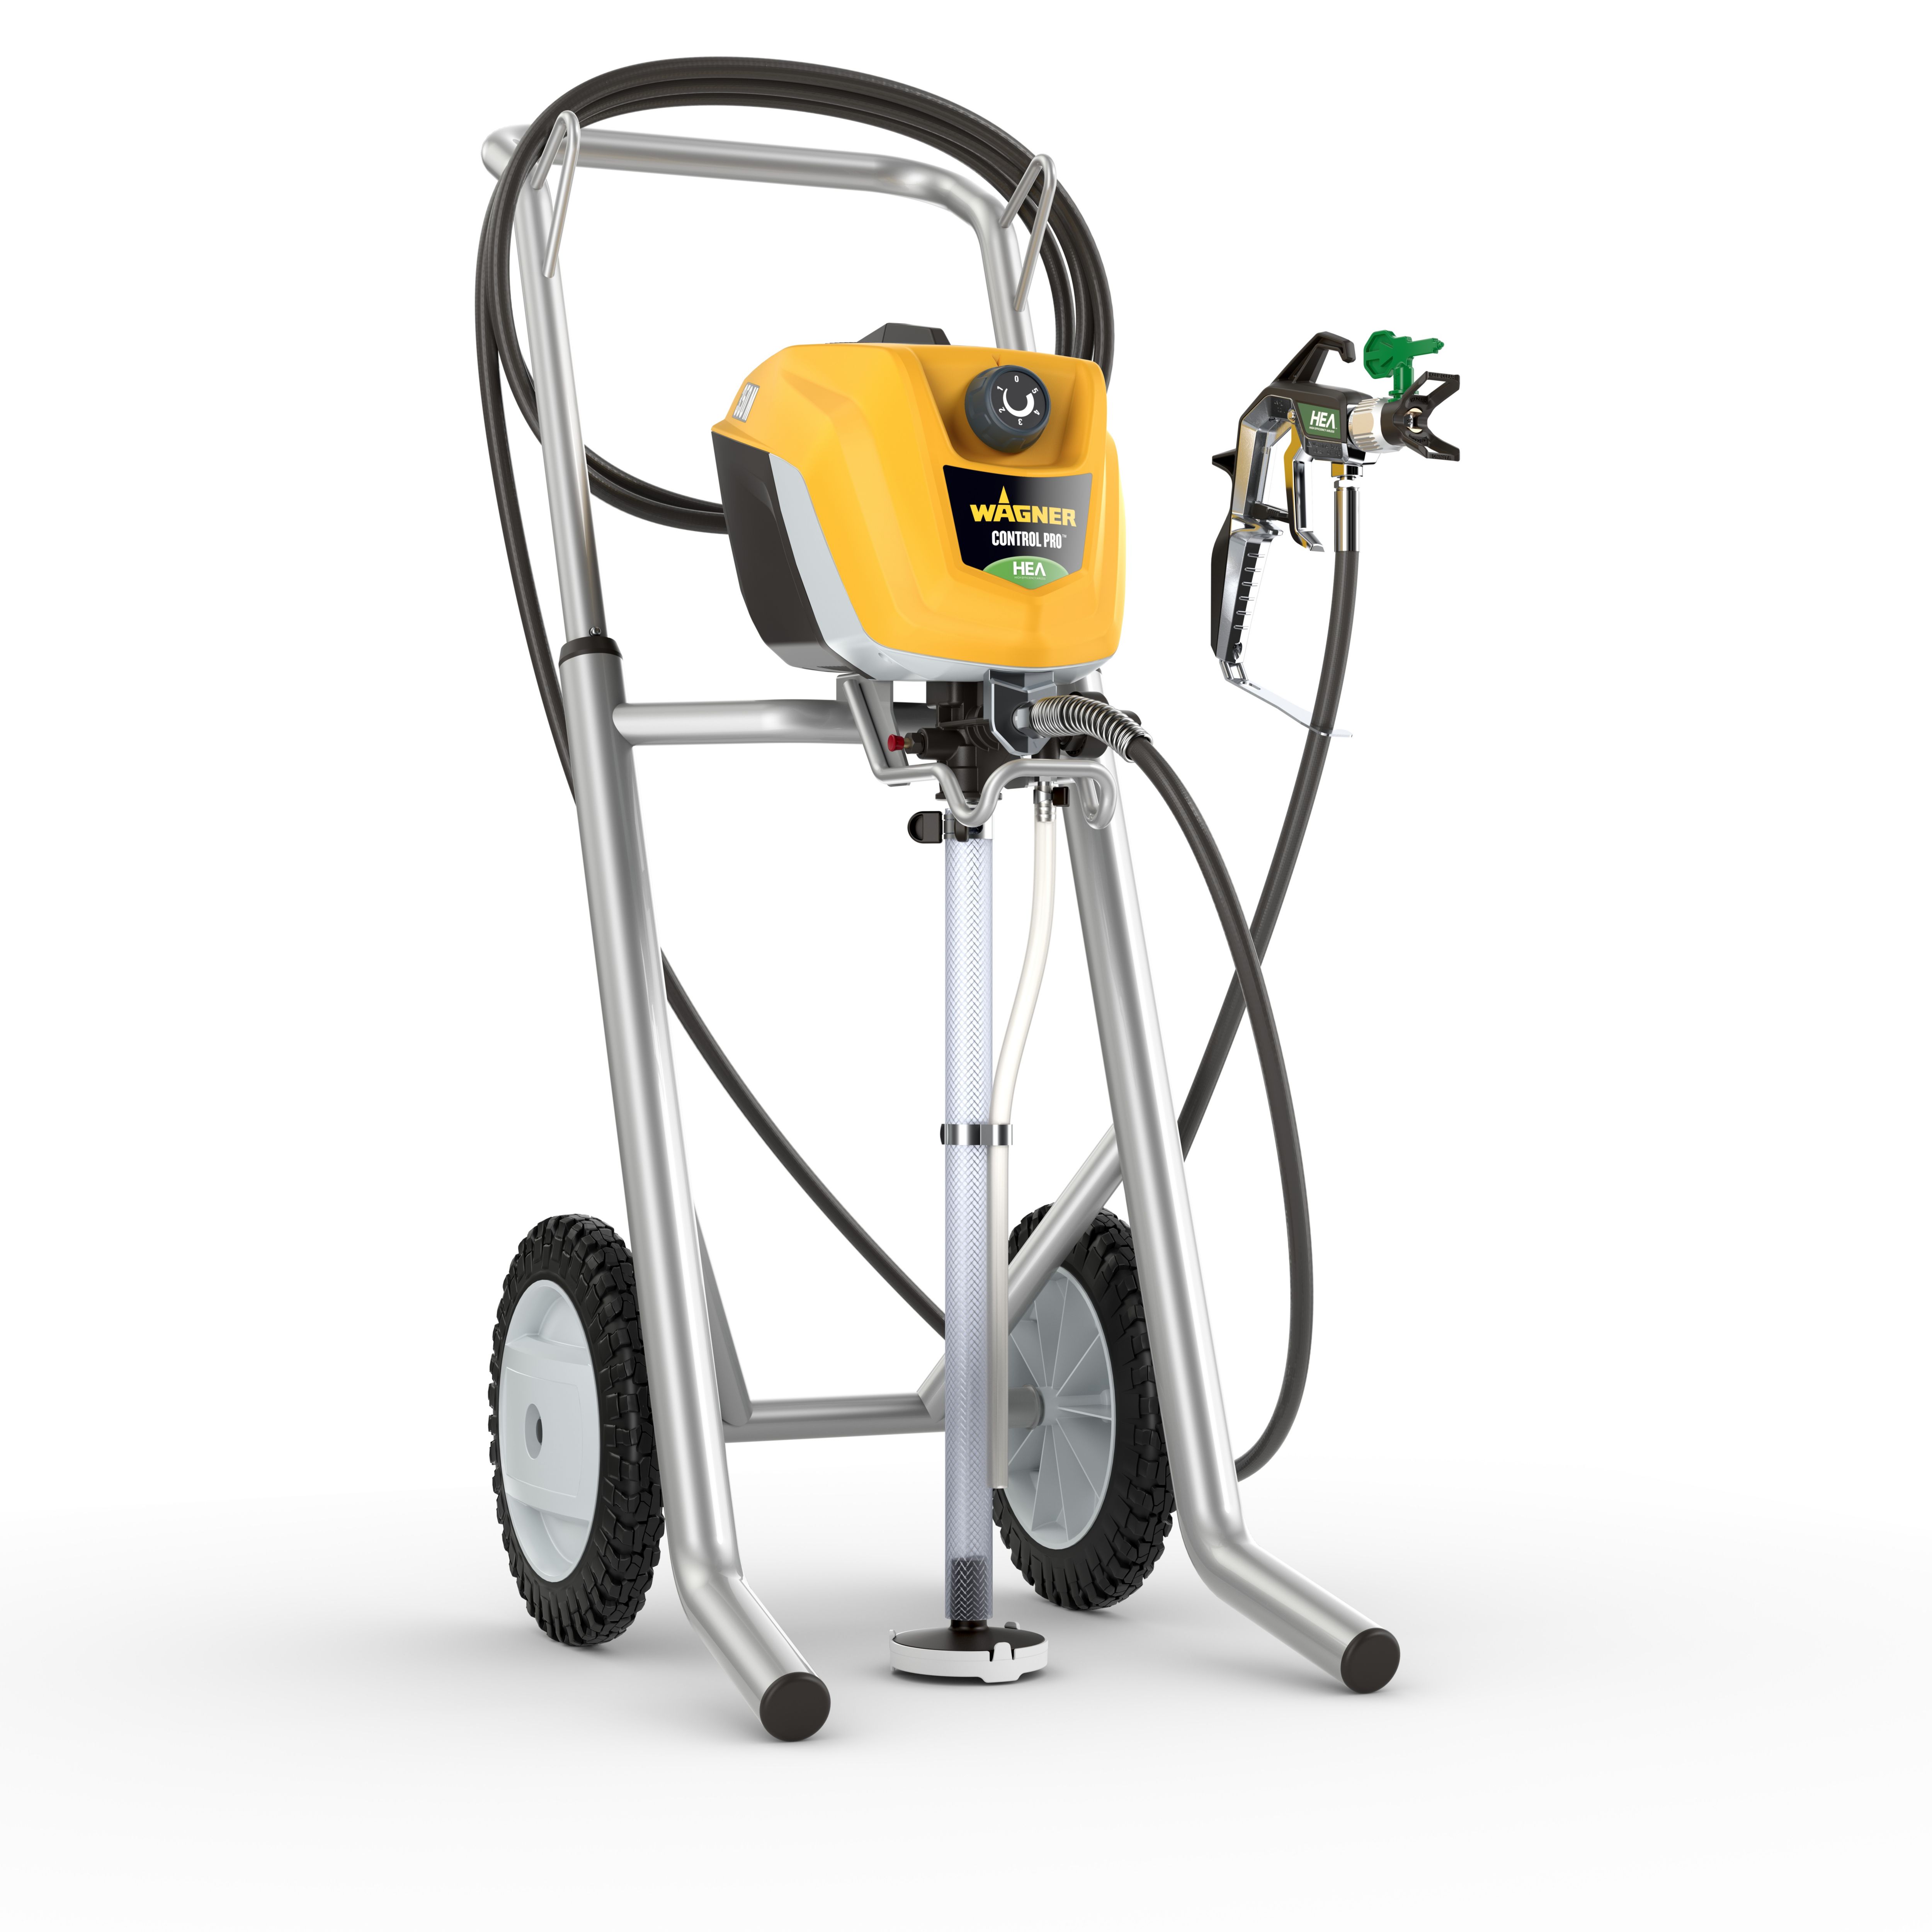 Wagner 230V 600W Corded Airless paint sprayer